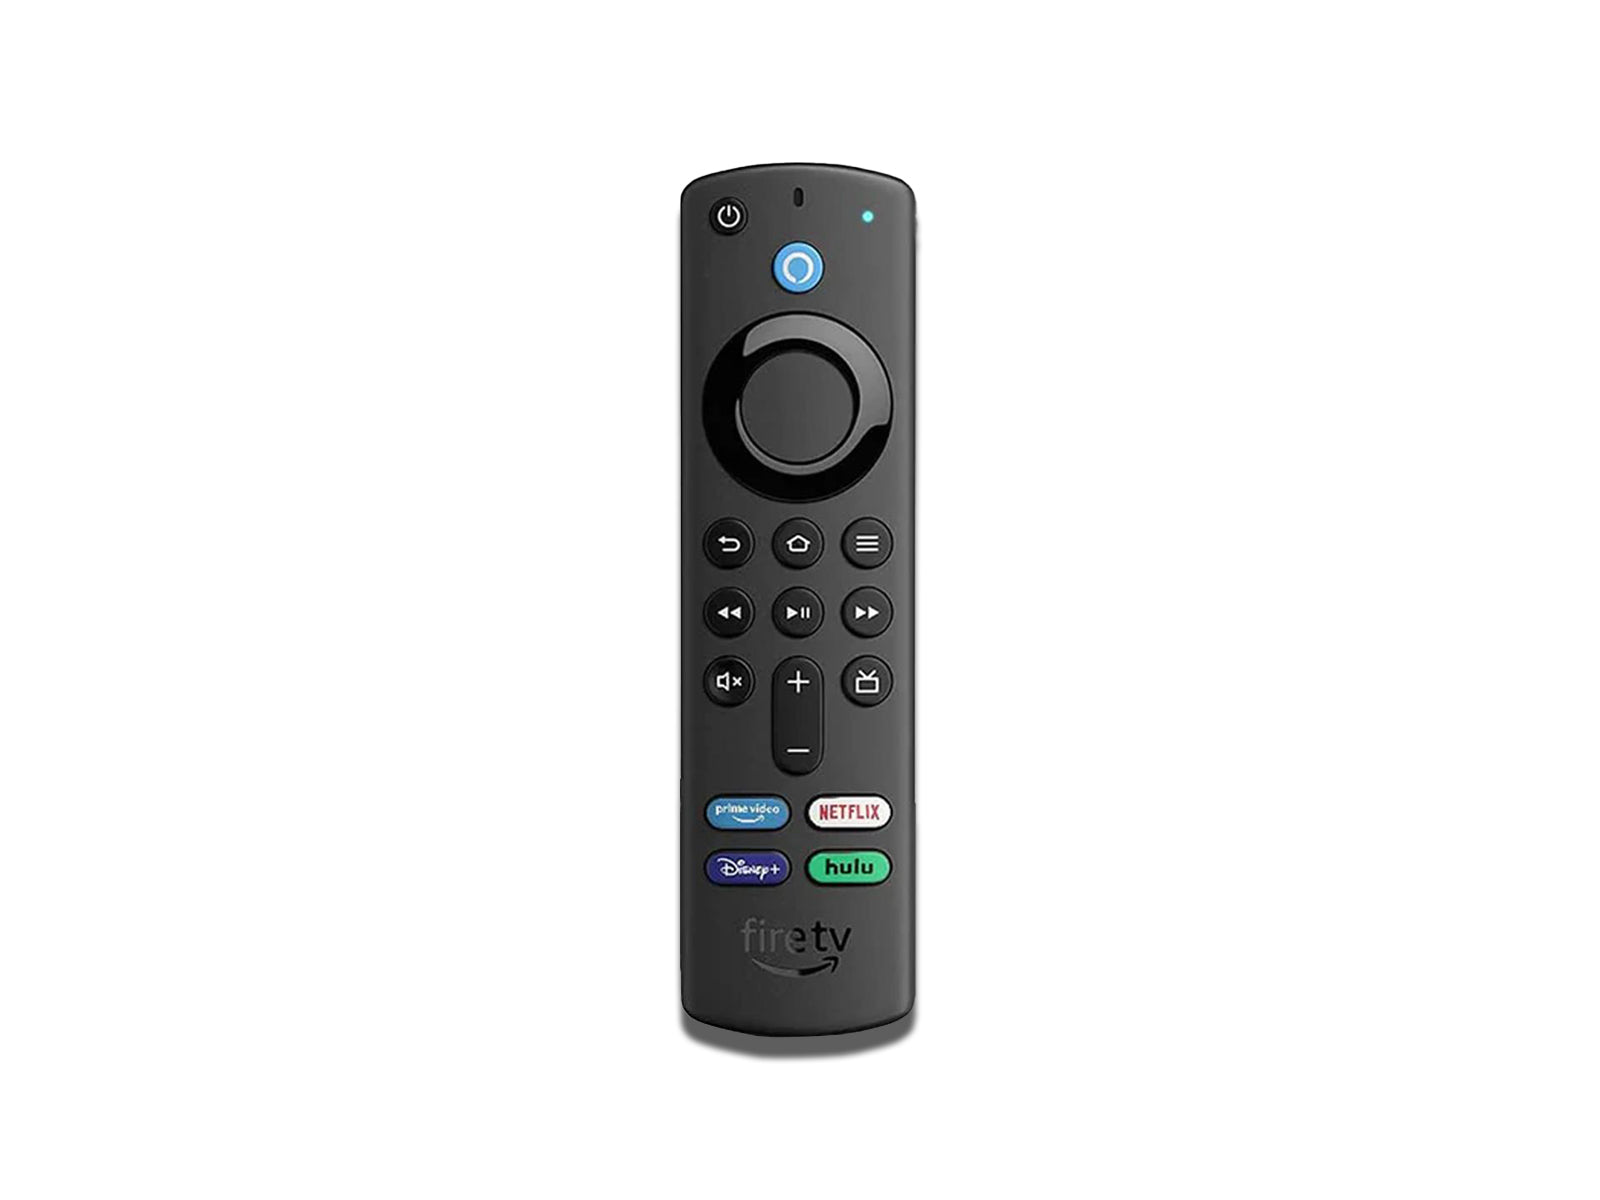 Image of the front view of the Firestick Remote control on the white background